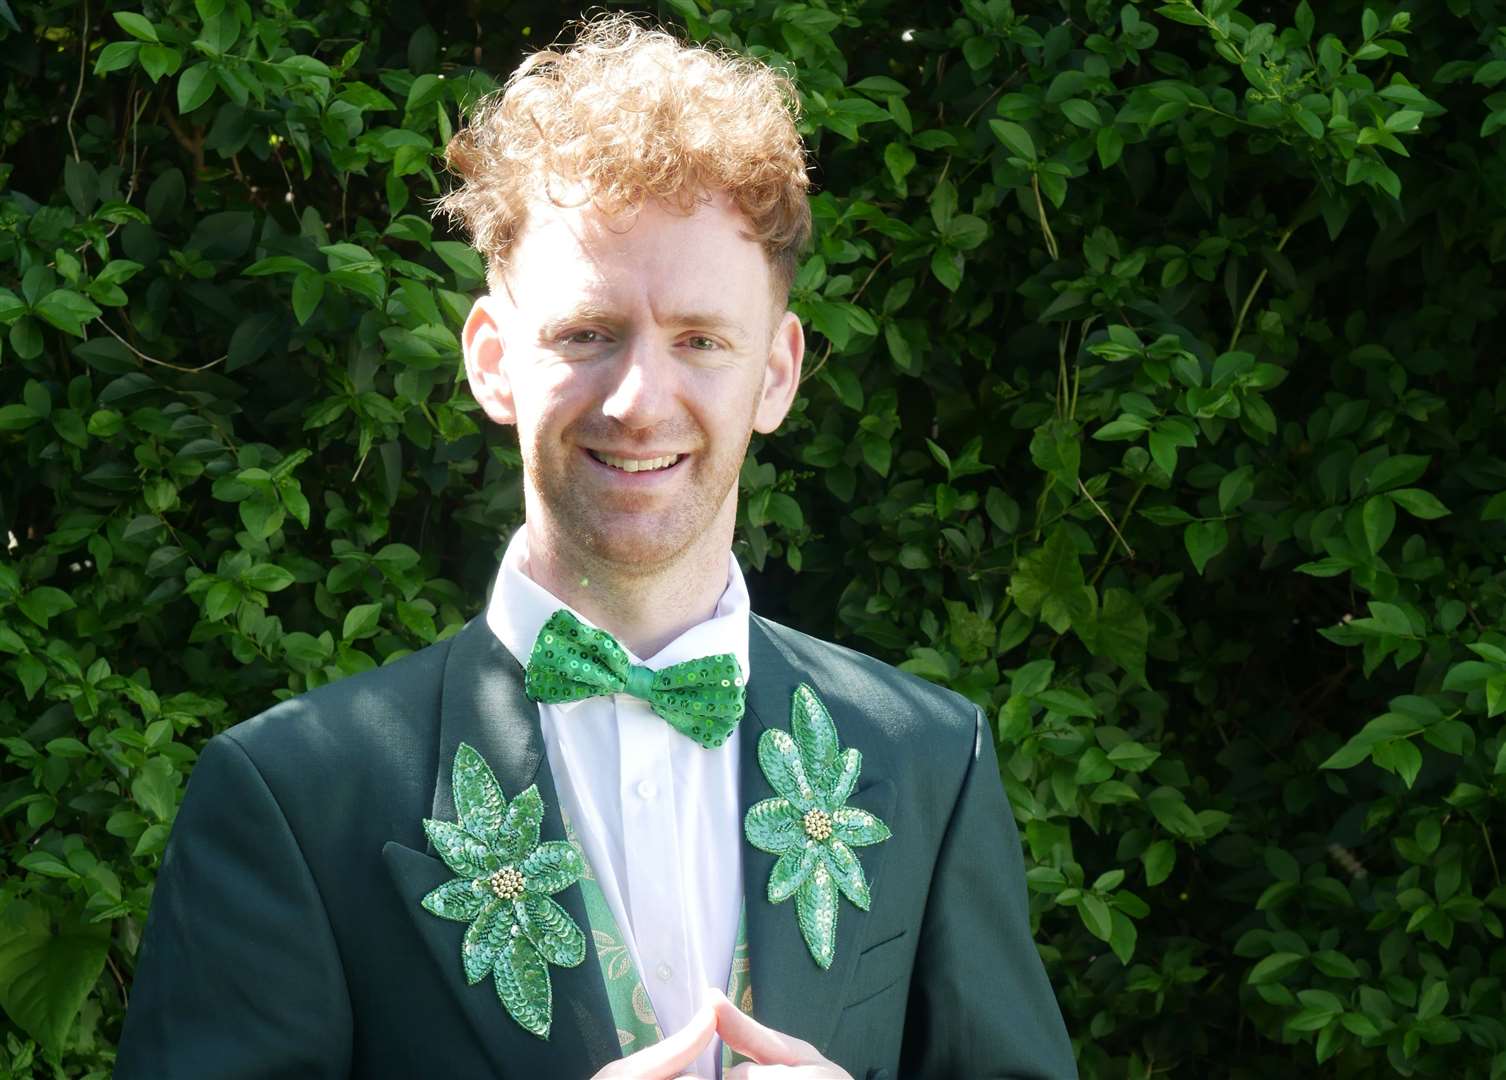 Chris Rankin, best known for his role as Percy Weasley, is in The Wizard of Oz